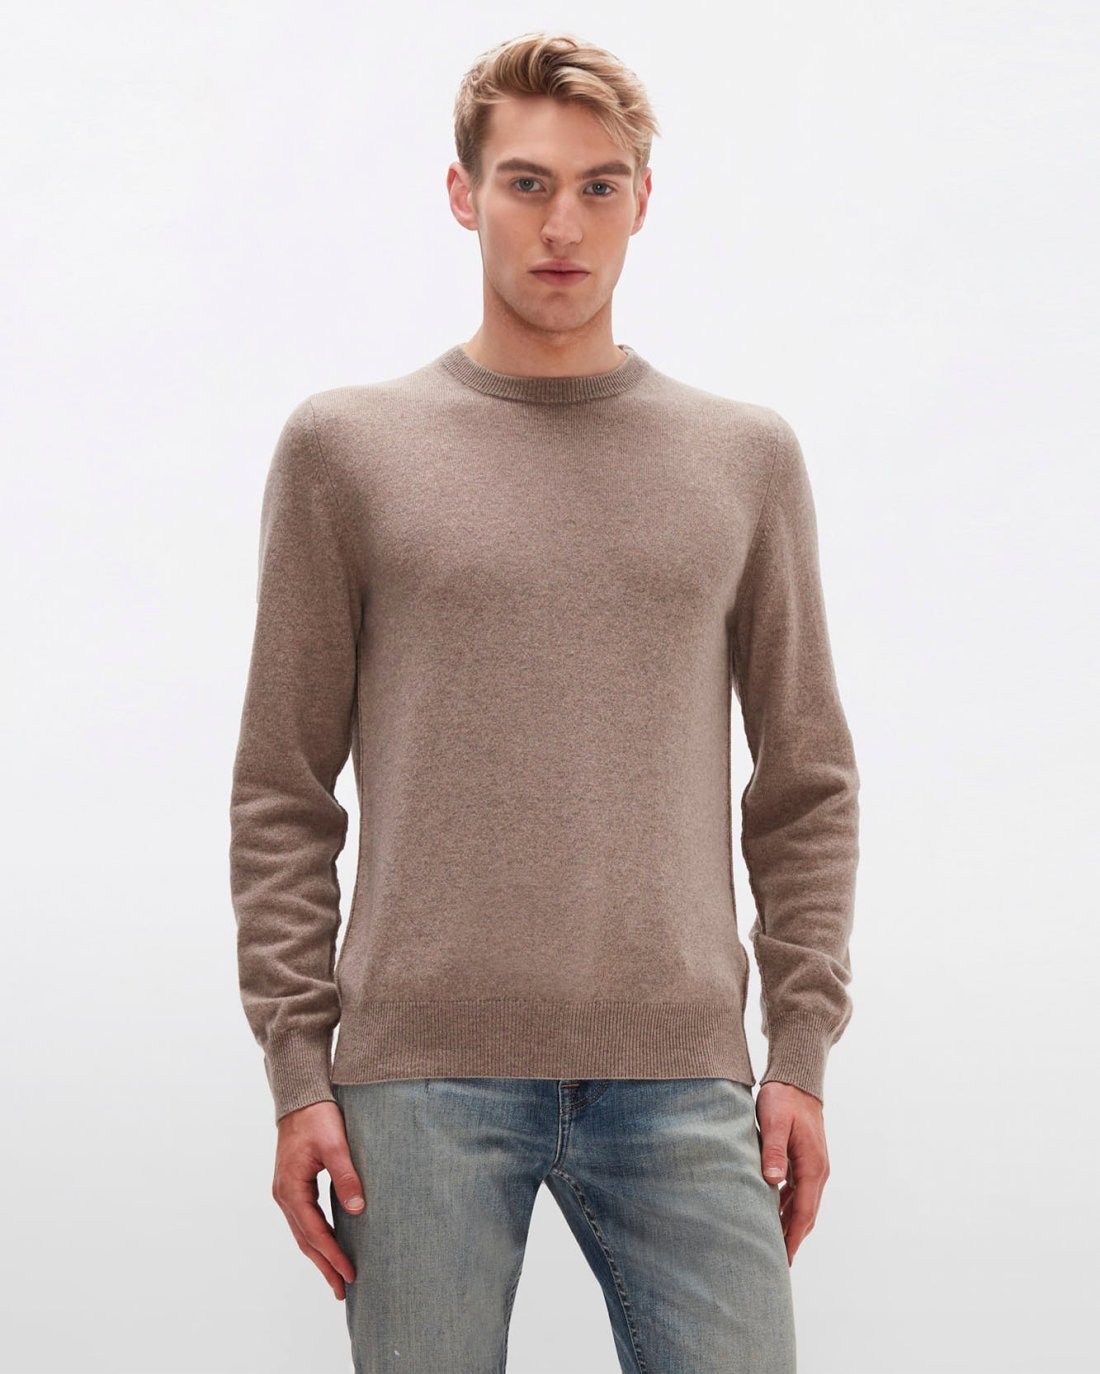 Cashmere Crew in Taupe | 7 For All Mankind